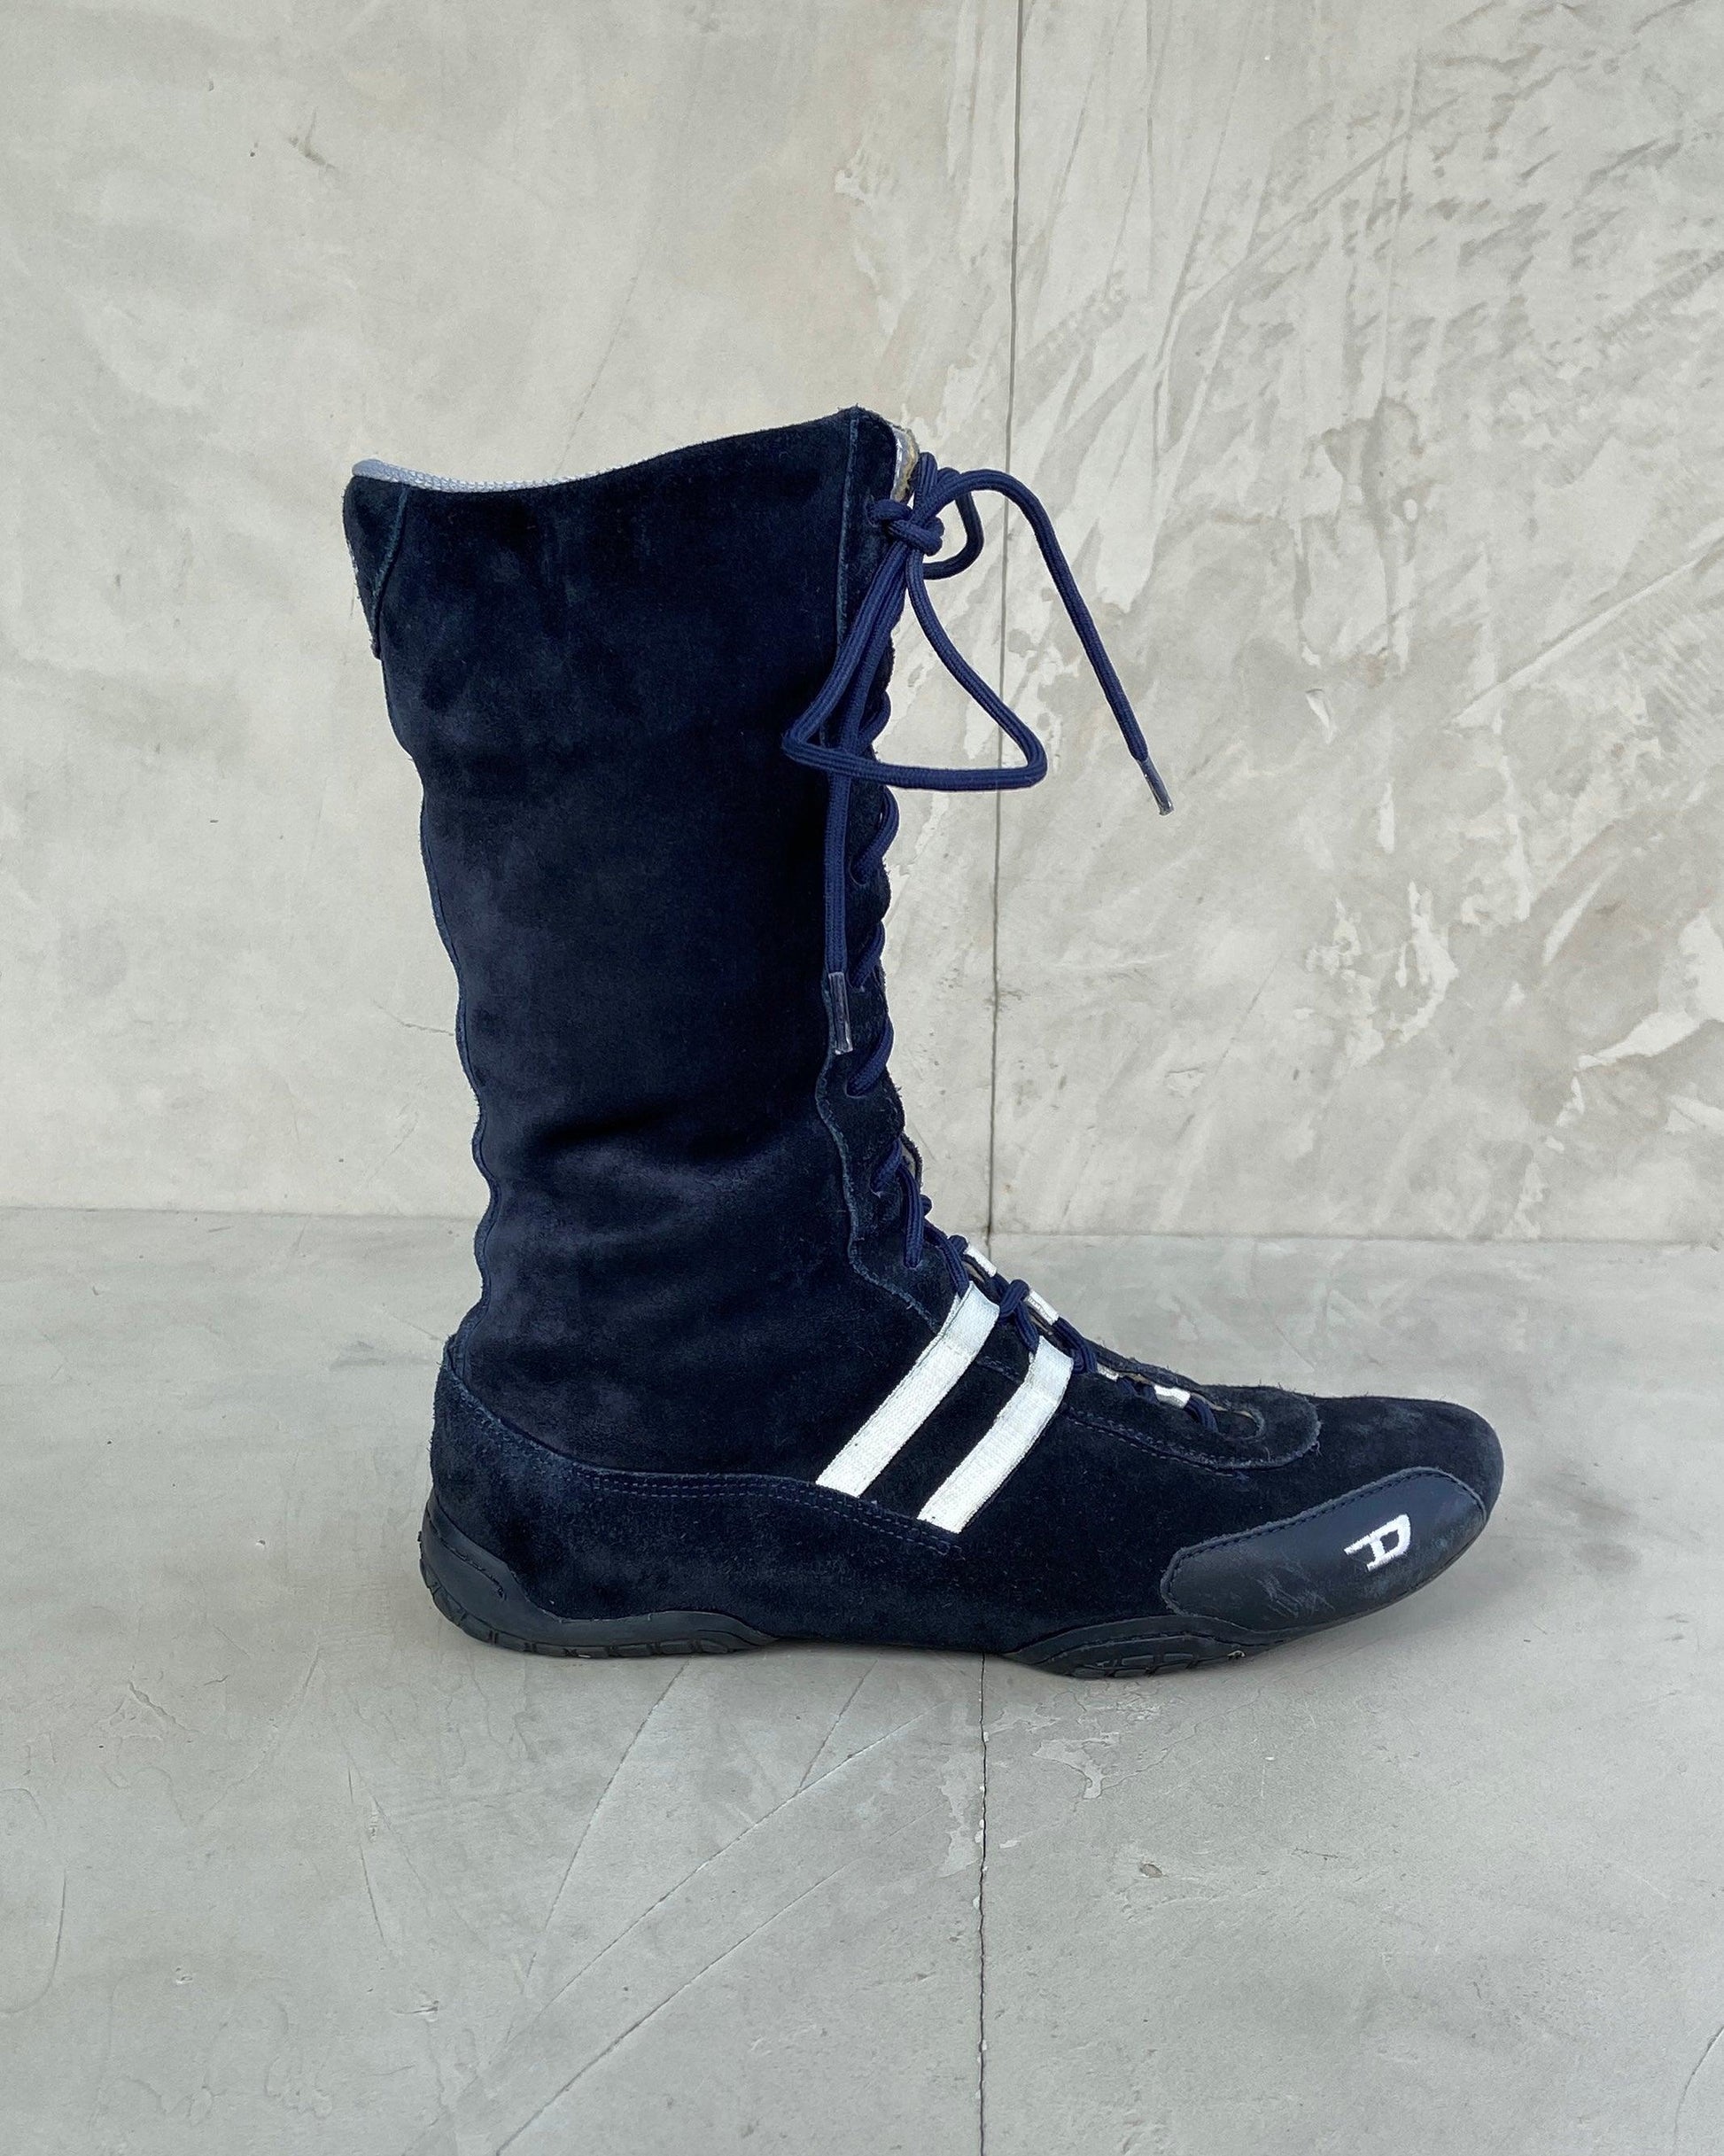 DIESEL 90'S LEATHER & SUEDE BOXING BOOTS - UK 4.5 - Known Source